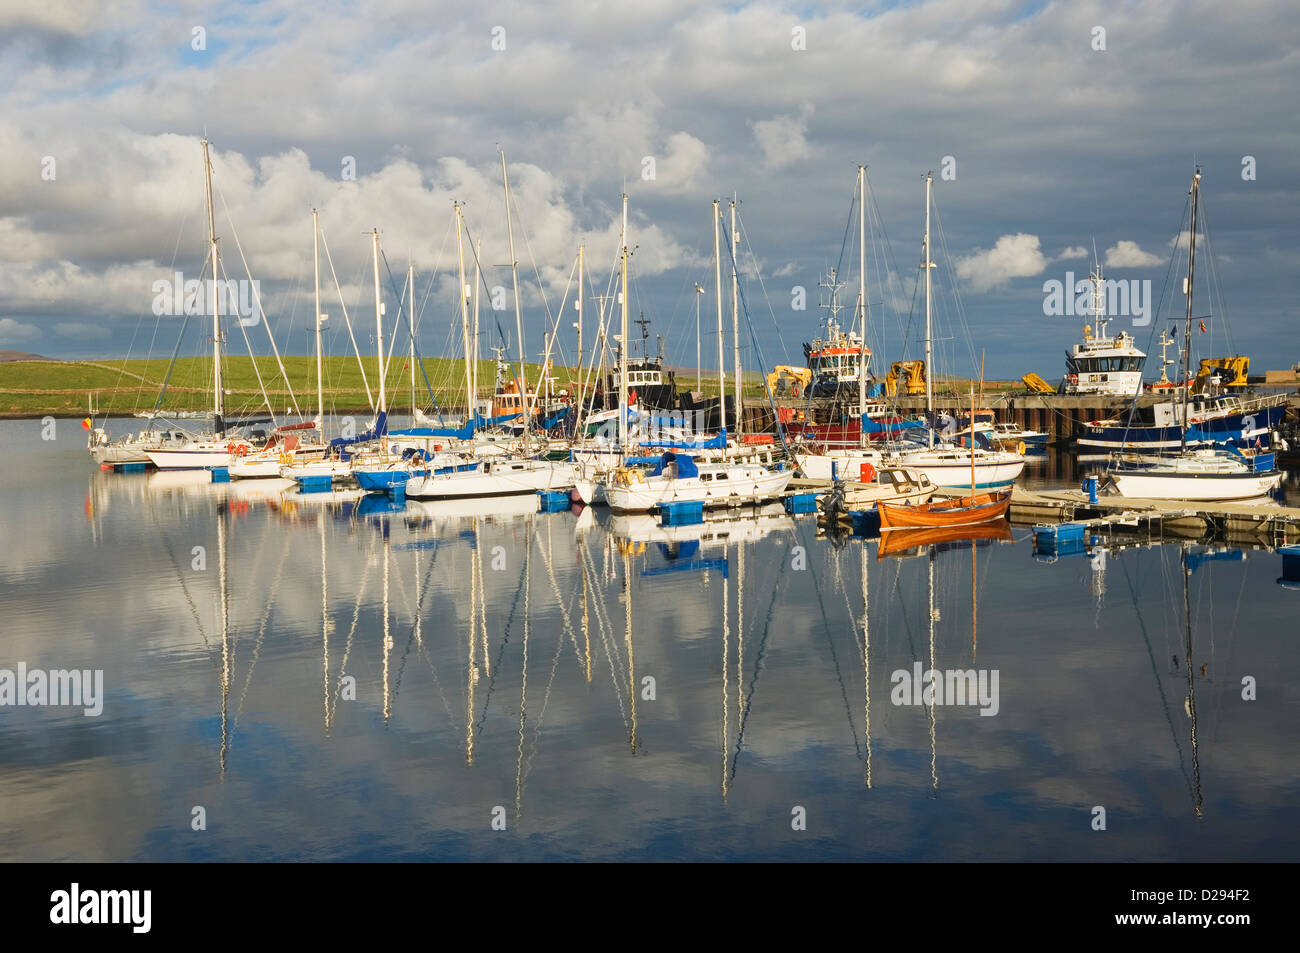 Marina with yachts at Stromness, Orkney Islands, Scotland. Stock Photo